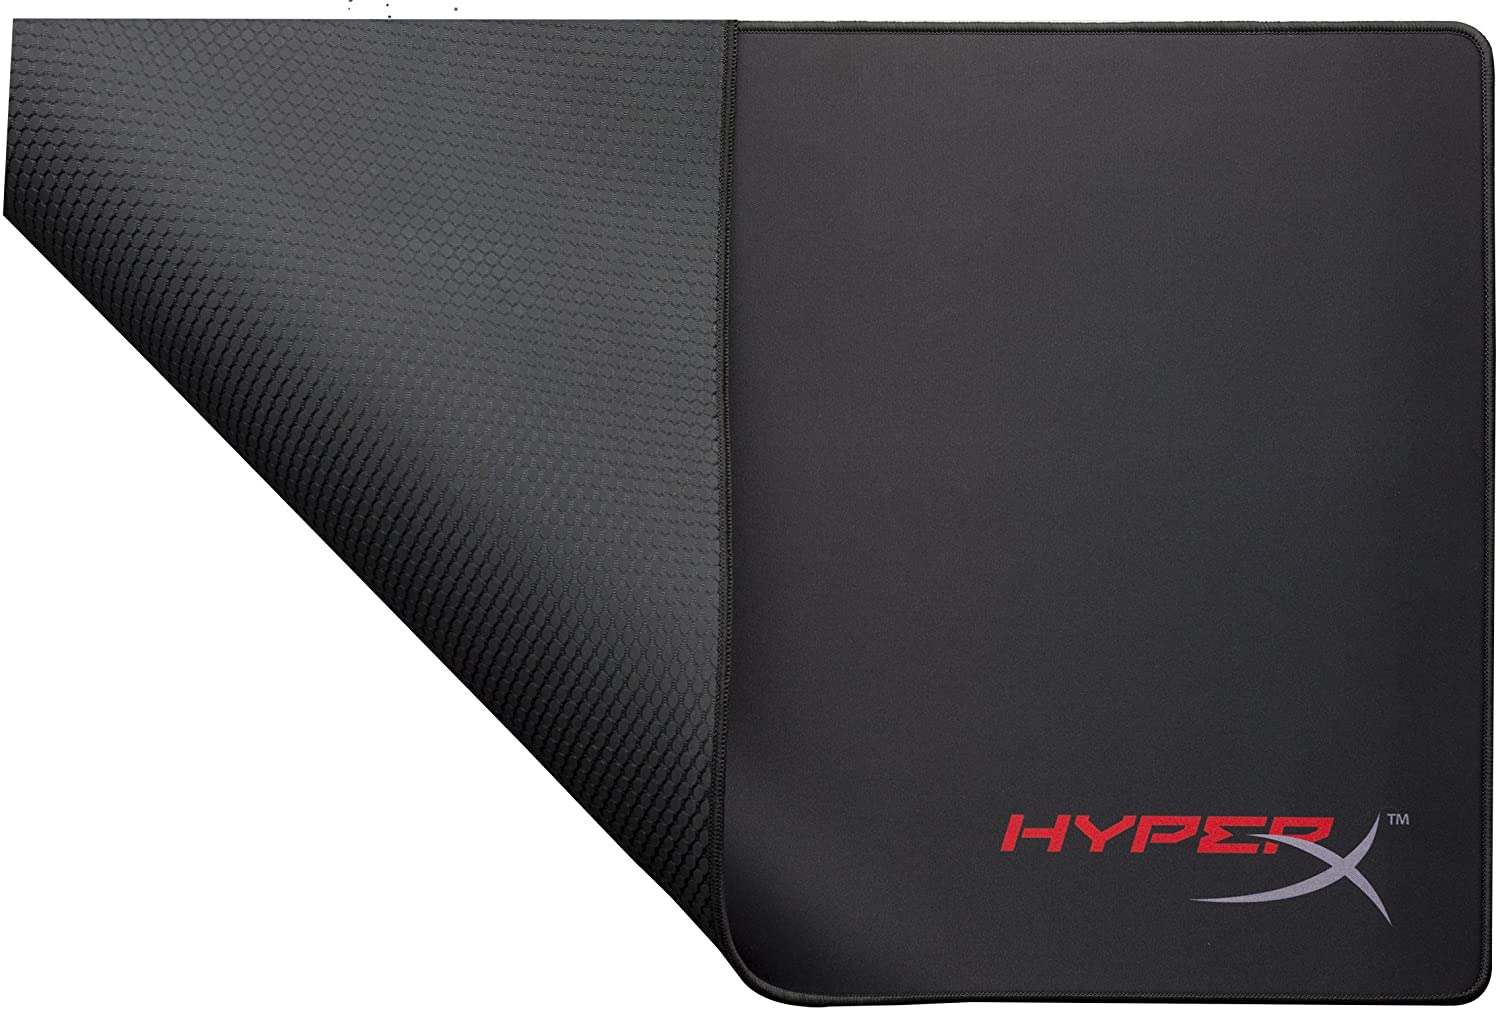 HyperX Fury S - Pro Gaming Mouse Pad, Cloth Surface Optimized for Precision, Stitched Anti-Fray Edges, X-Large 900x420x4mm - Pro-Distributing